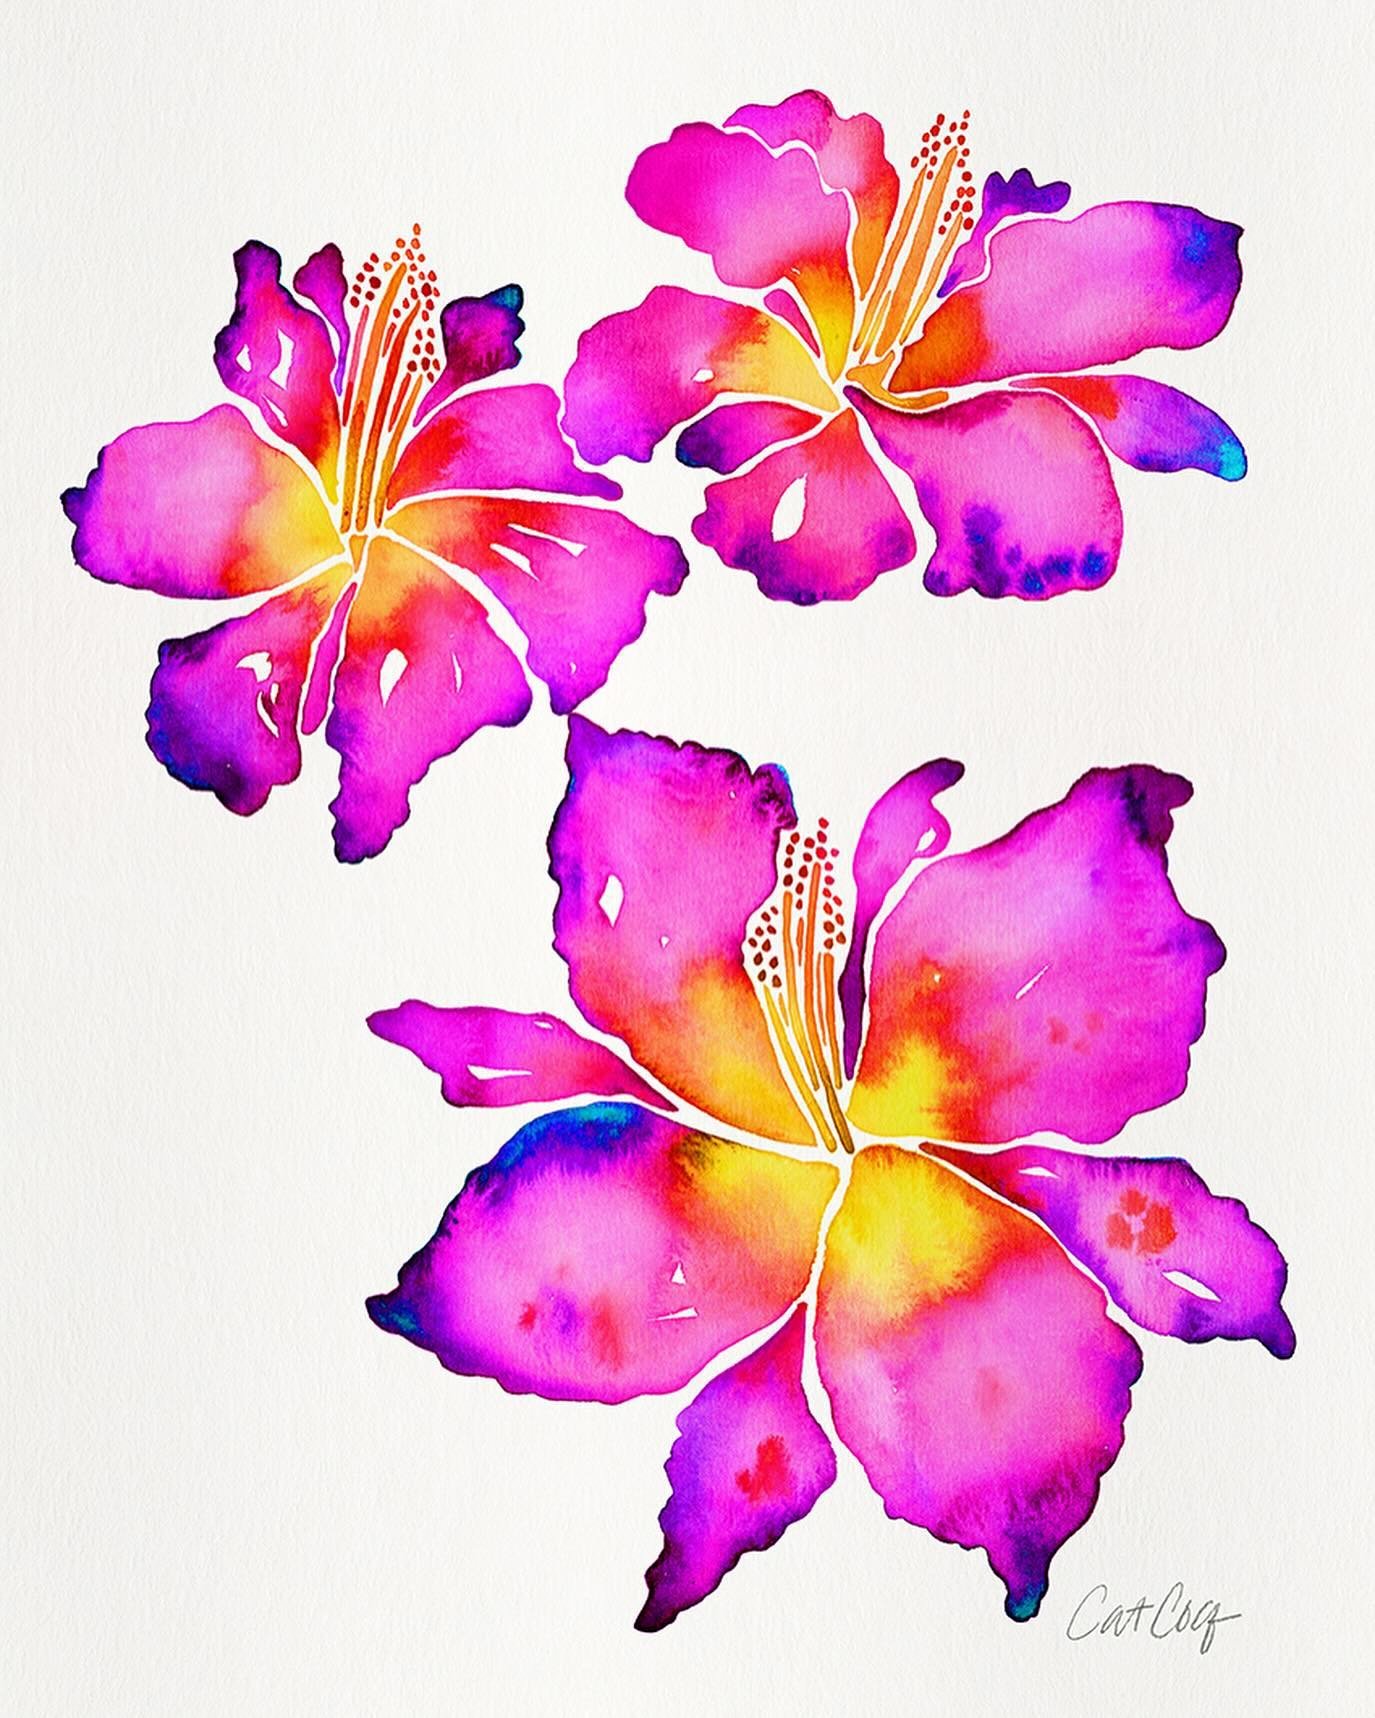 Watercolor day lilies, inspired by ones I saw in the Denver Botanical Garden. 💐  I get artistsic inspiration all over the place, especially while I&rsquo;m traveling. Botanical gardens are some of my favorite places to photograph reference photos to